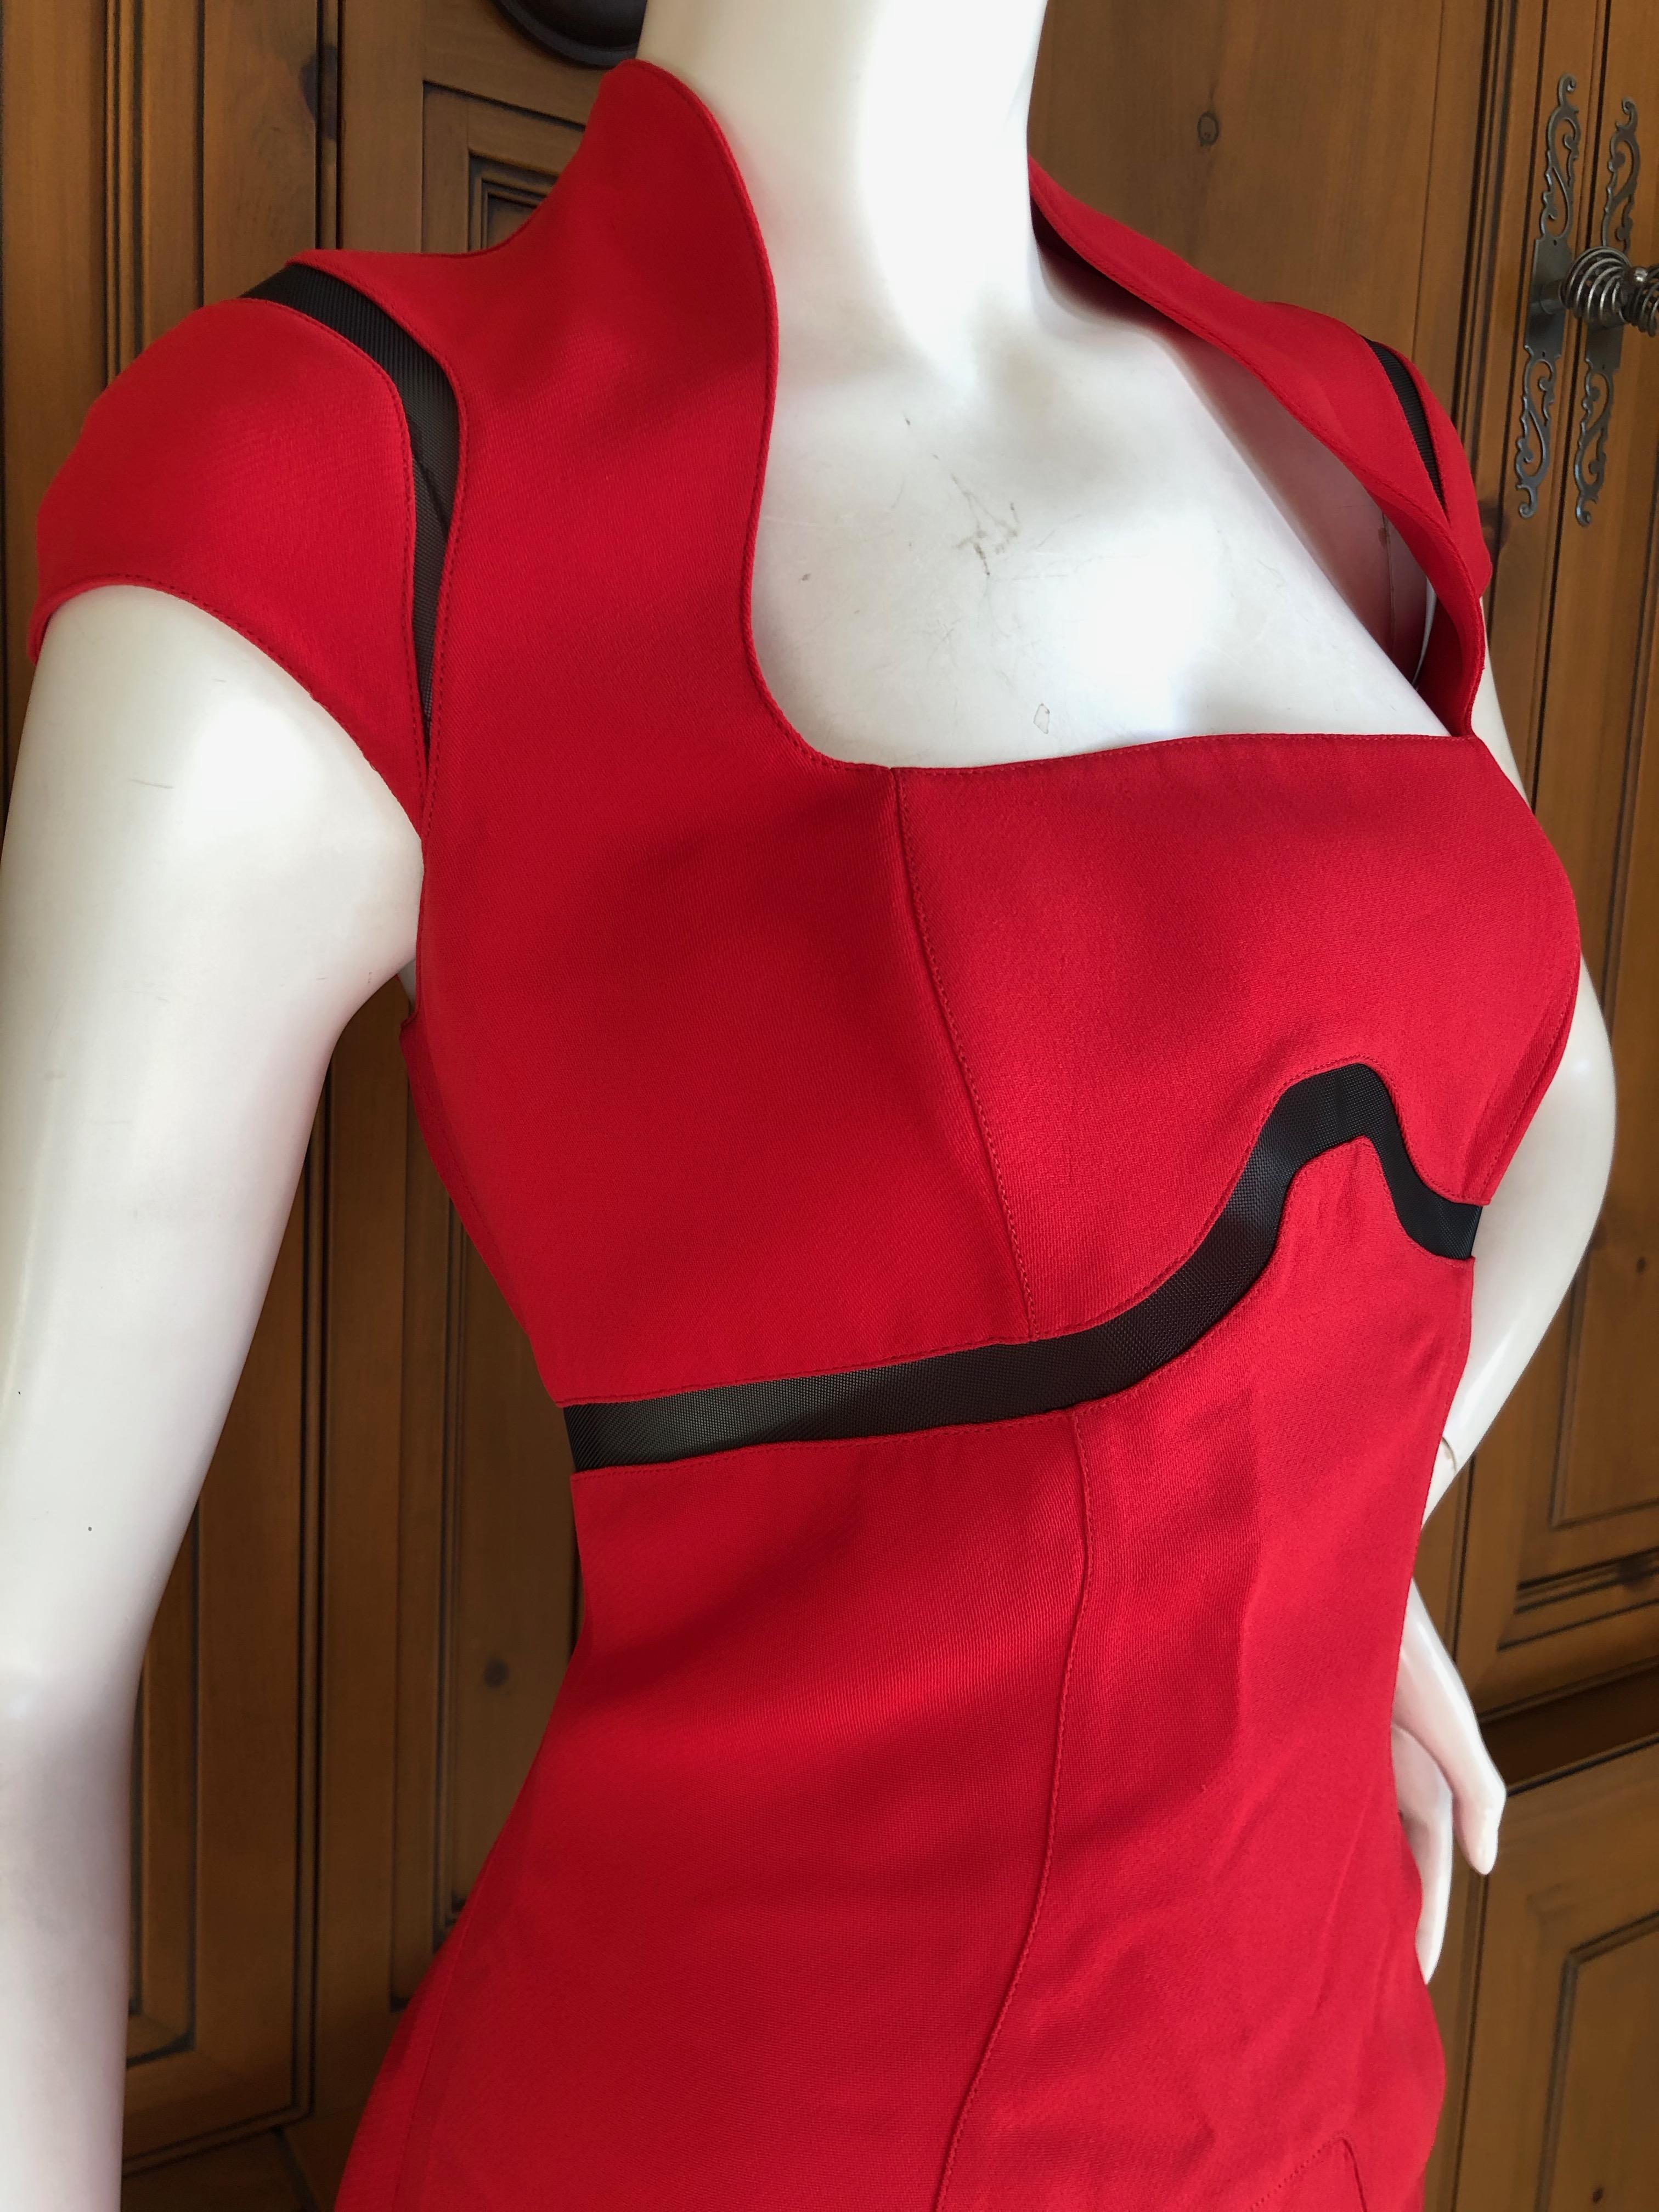 Thierry Mugler Vintage 1980's Red Cocktail Dress with Sheer Inserts For Sale 1